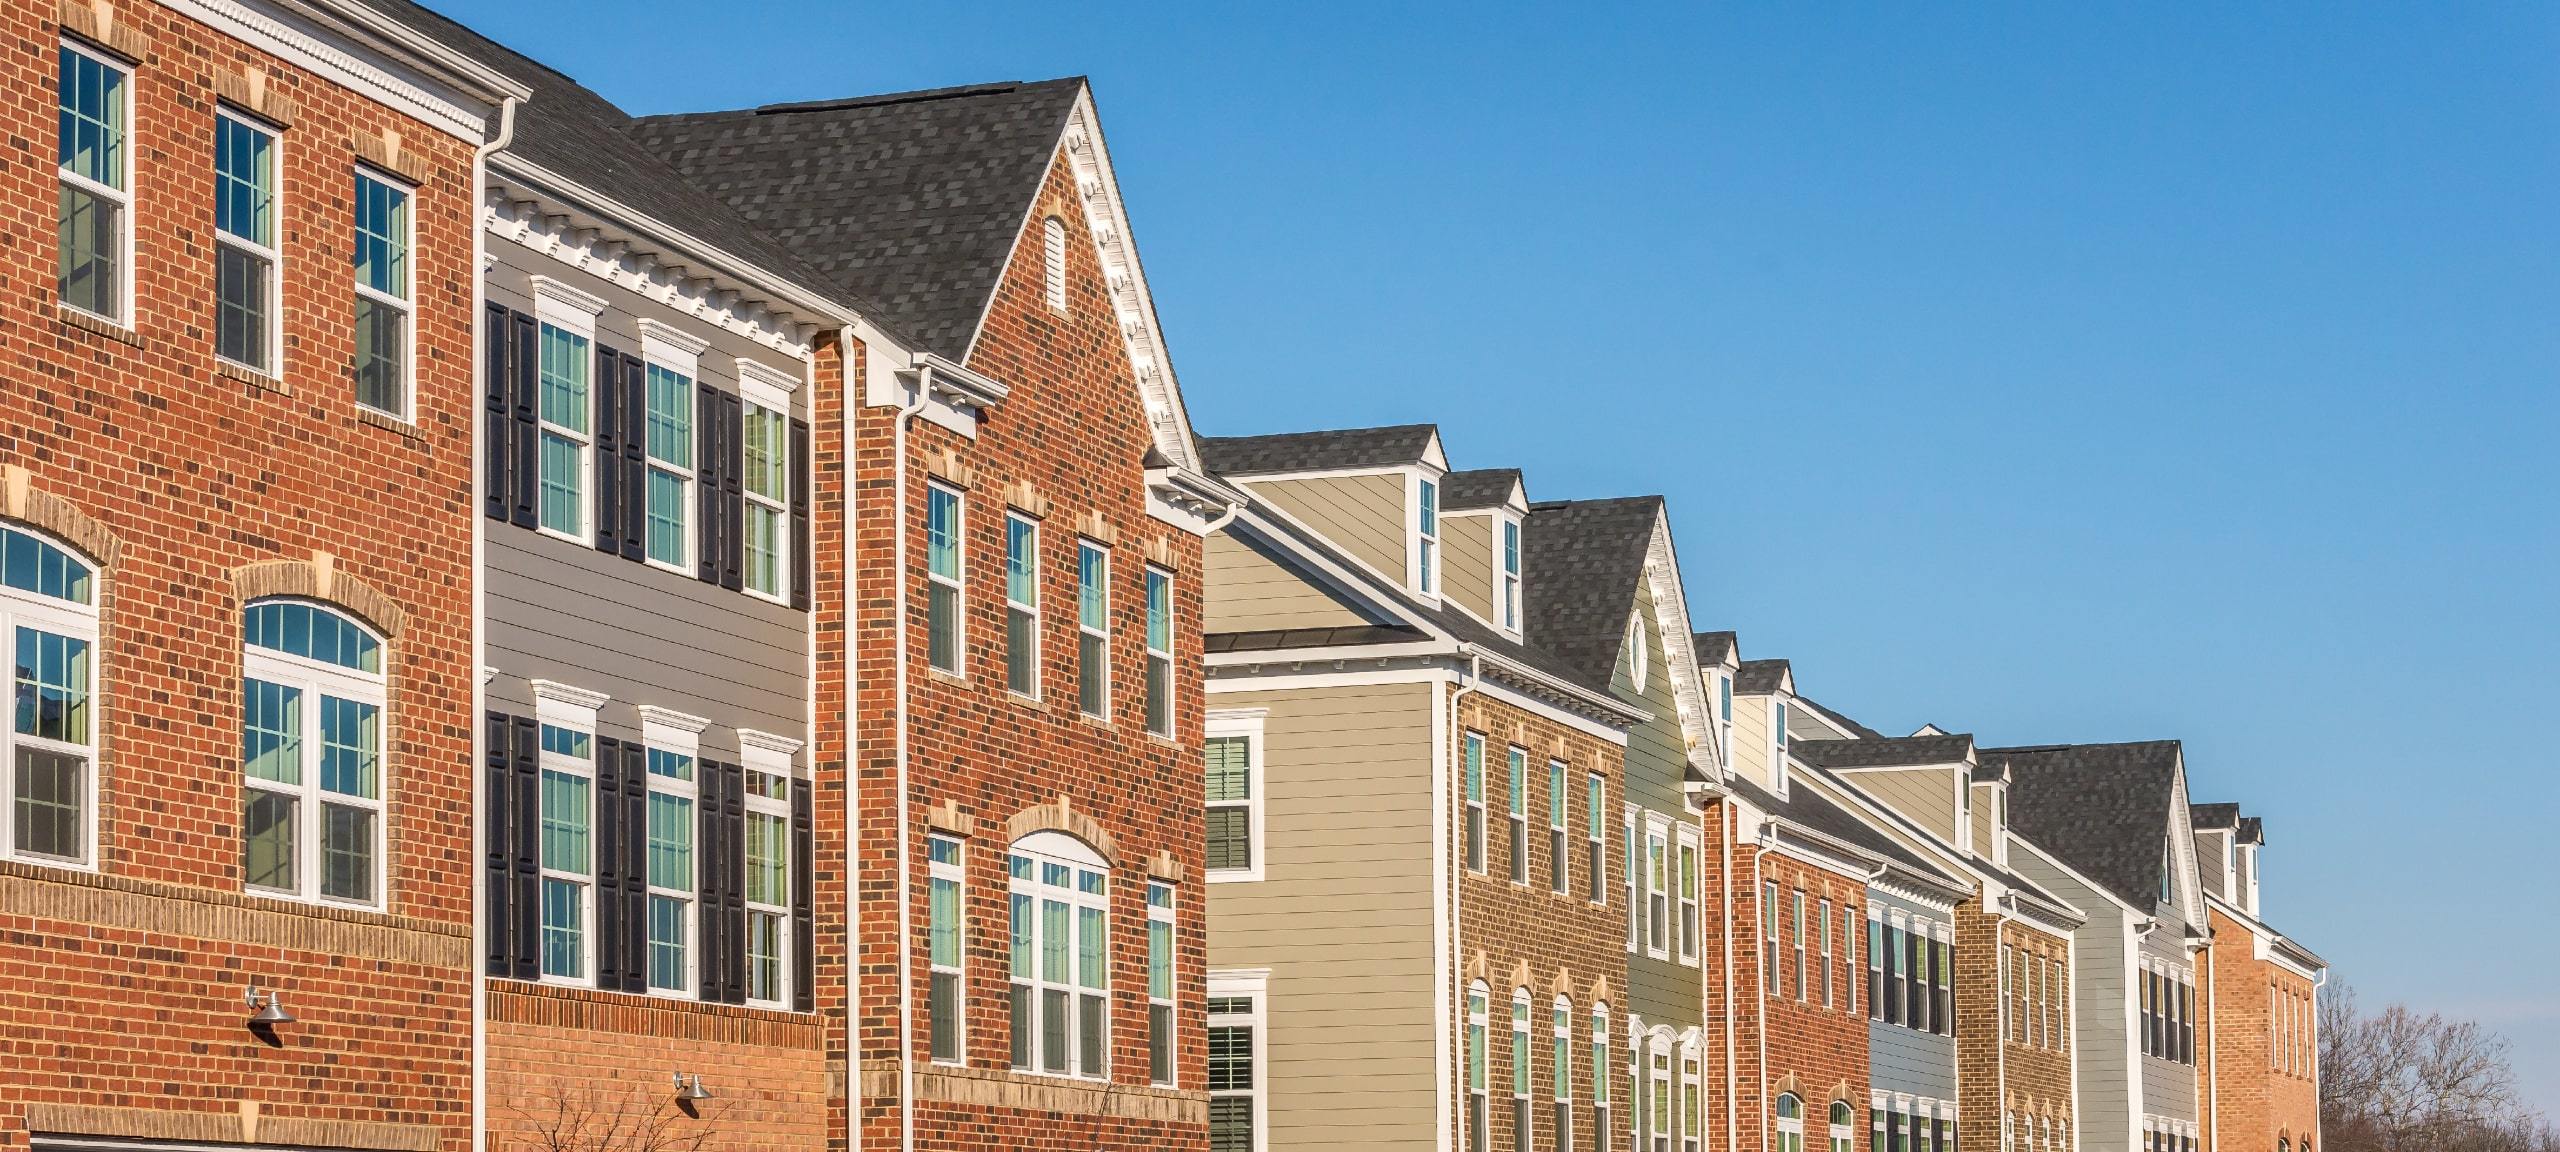 Brick townhomes in residential area, typical of Owings Mills, Maryland